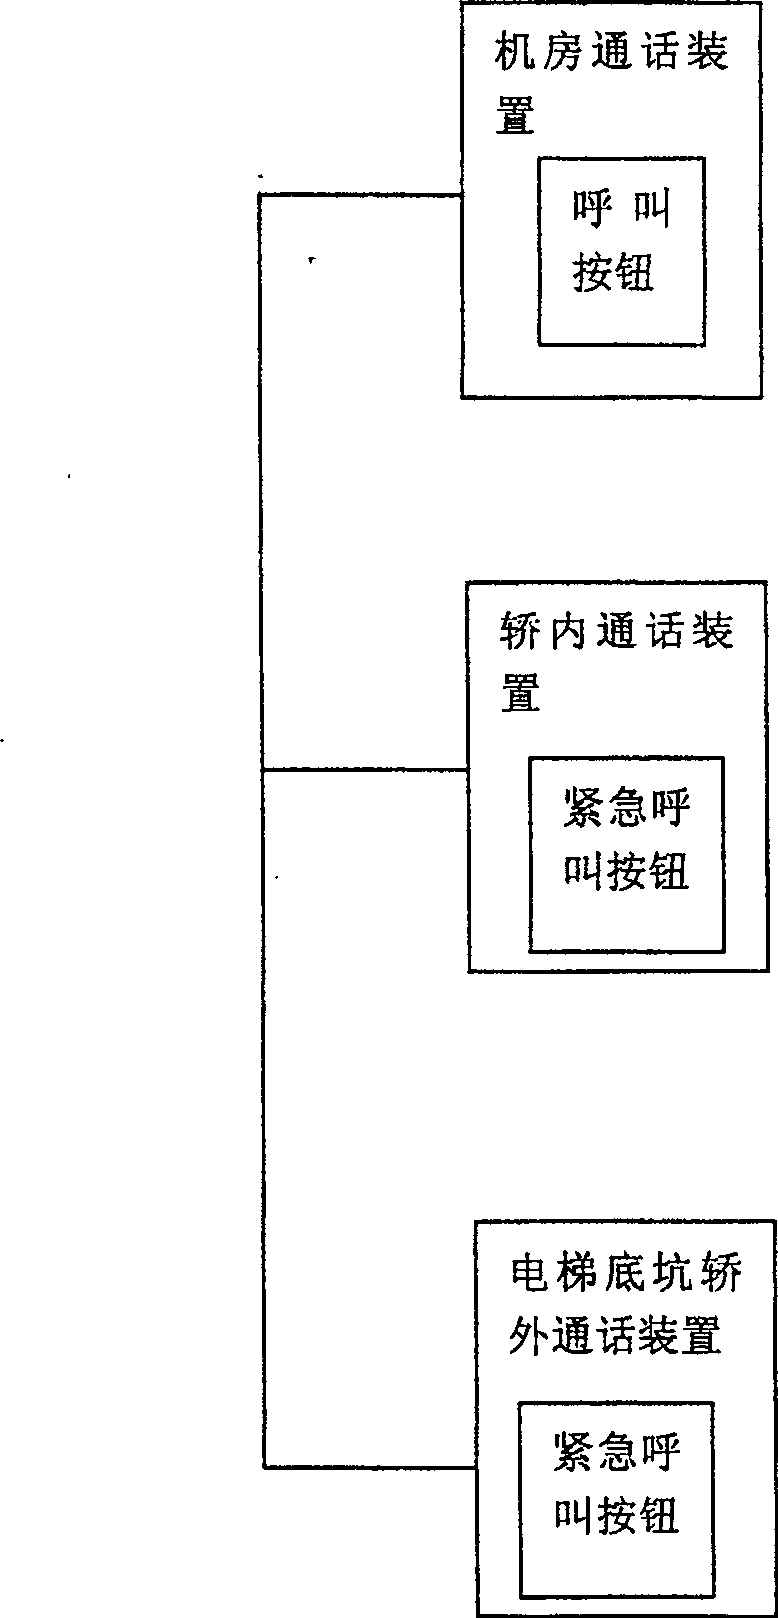 Communication device for lift